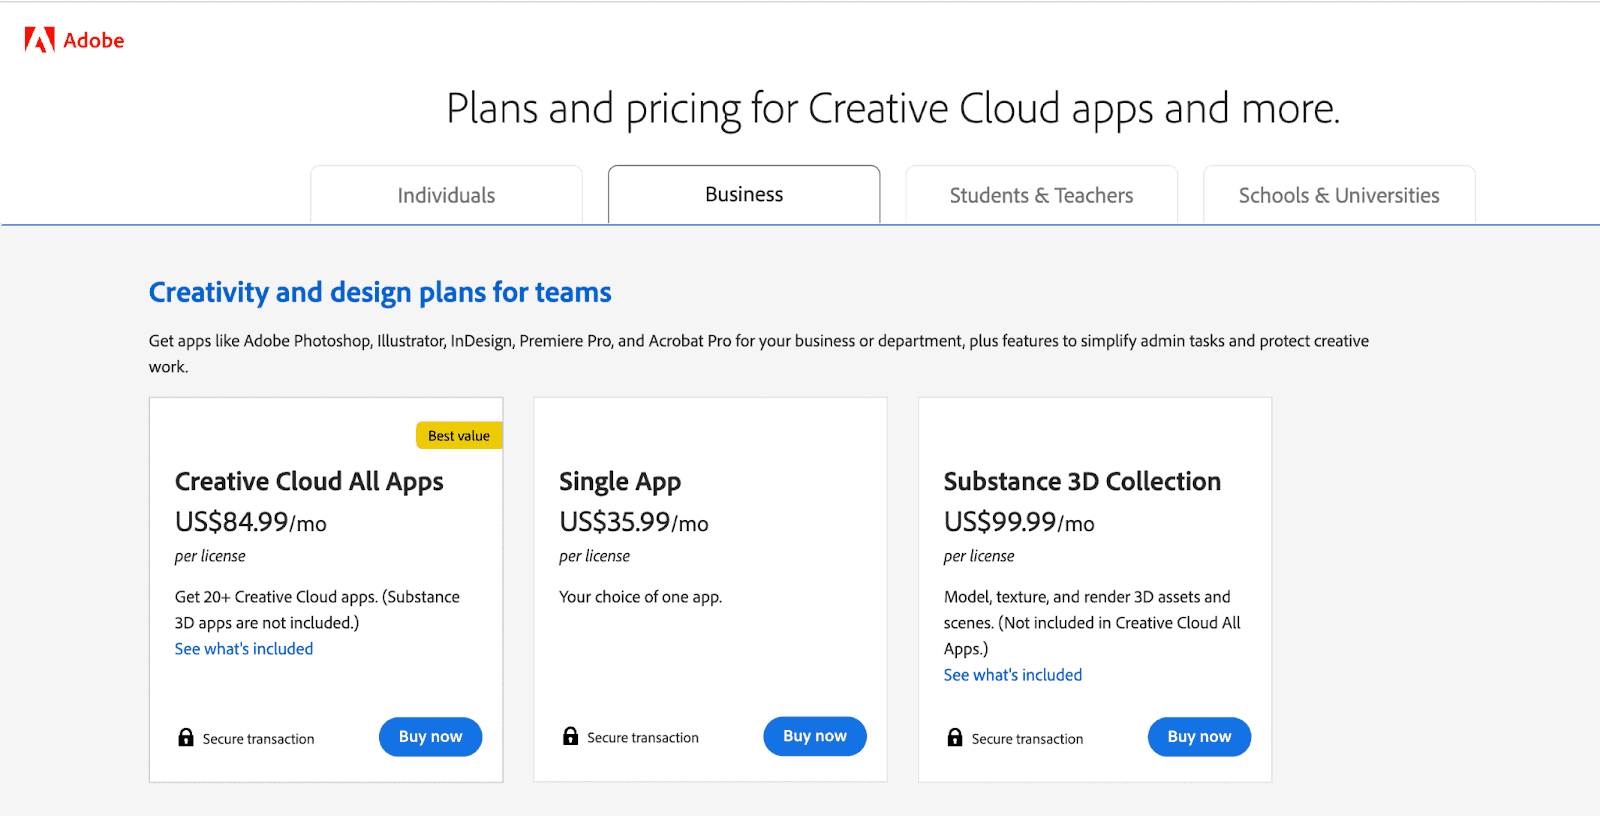 Adobe Creative Cloud pricing page